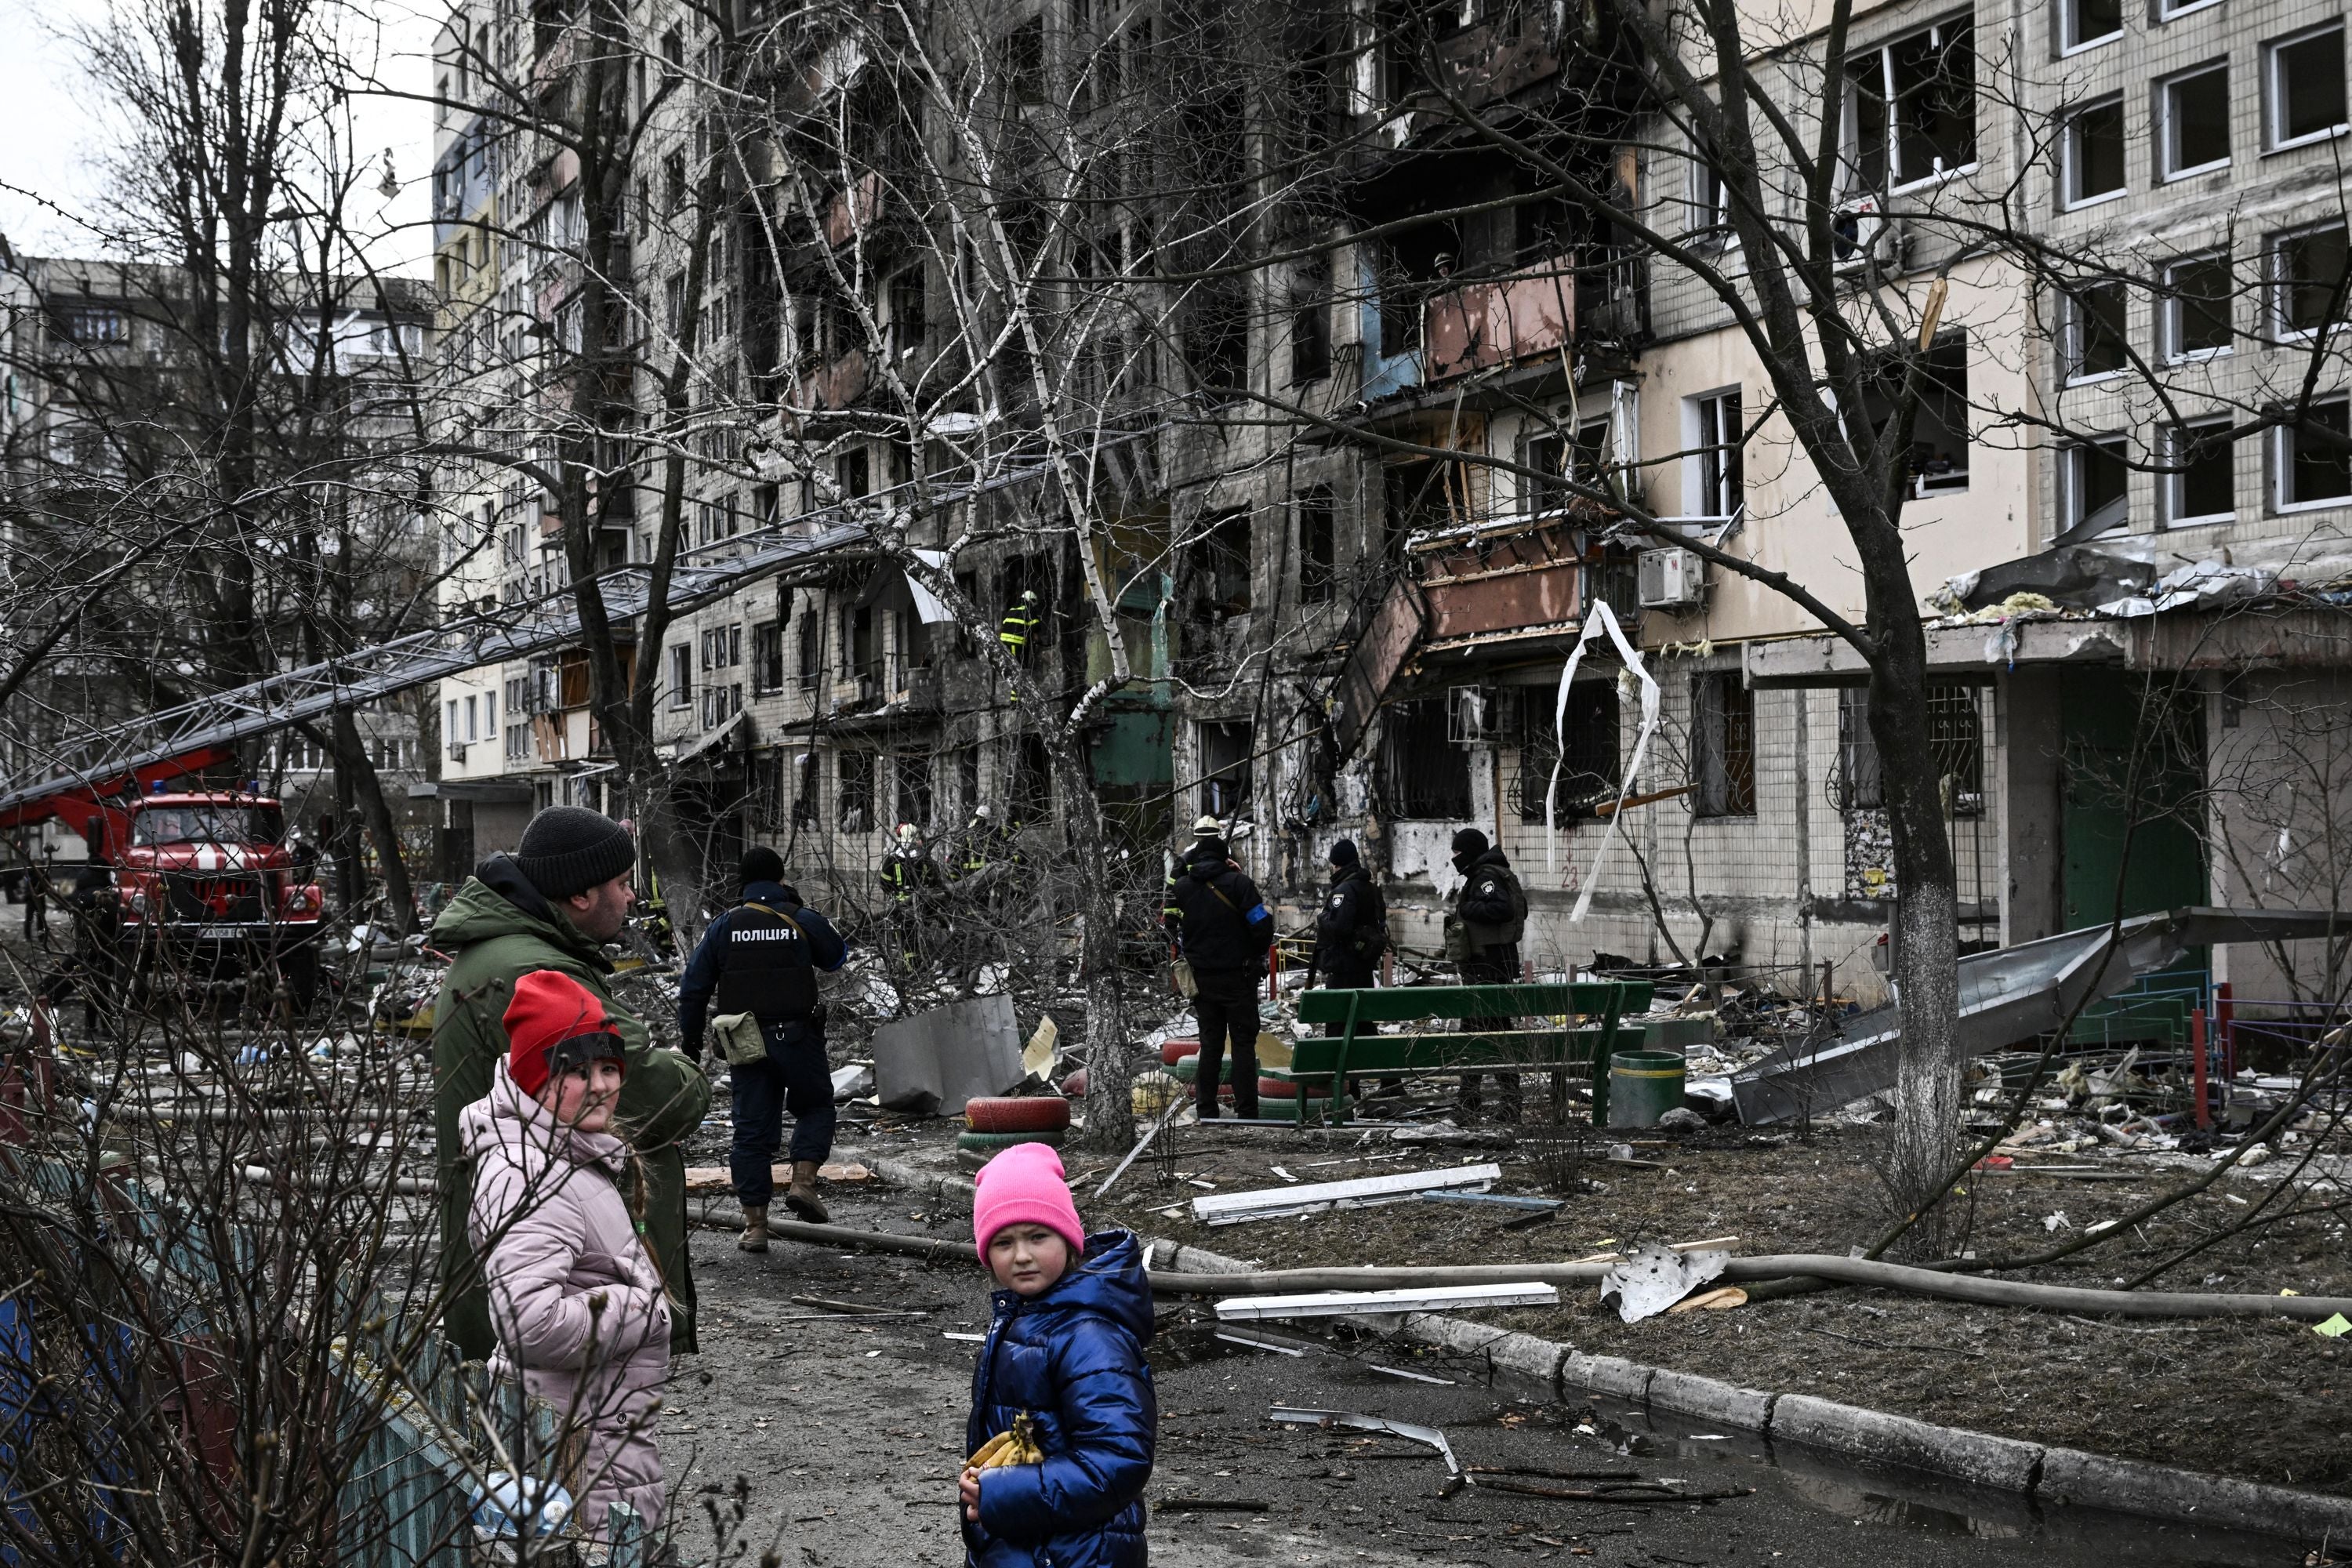 Children stand in front of a destroyed apartment building  following Russian shelling in the northwestern Obolon district of Kyiv, Ukraine on March  14, 2022. (Photo: Aris Messinis / AFP, Getty Images)